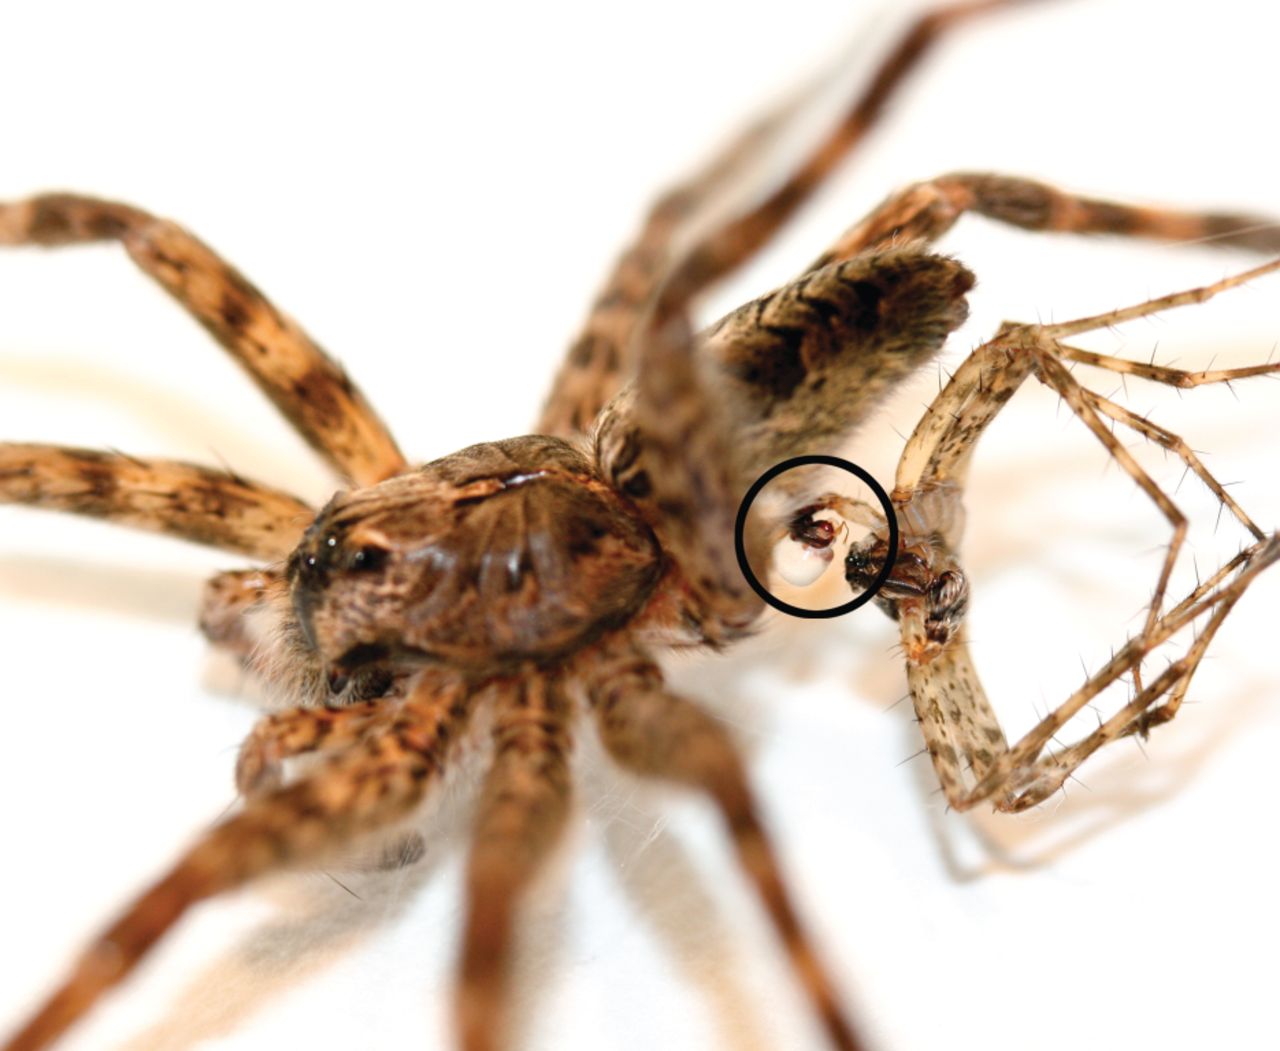 Male dark fishing spiders found to die spontaneously after mating